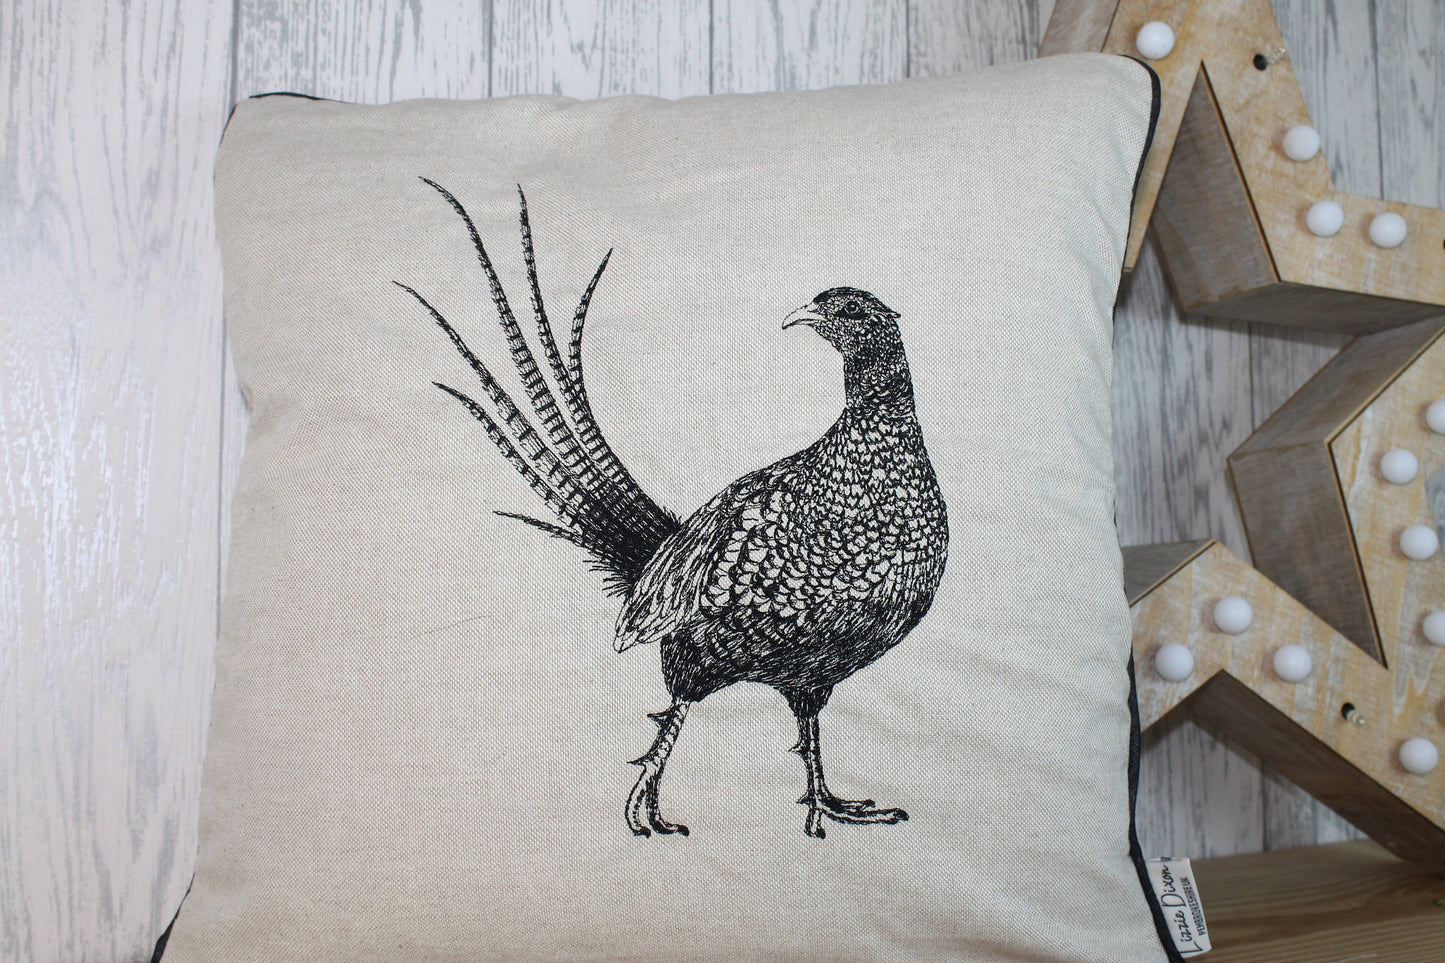 Pheasant Cushion,14" Cream Cushion- Piped Cushion Cover, British Wildlife collection. Double sided- Embroidered cushion